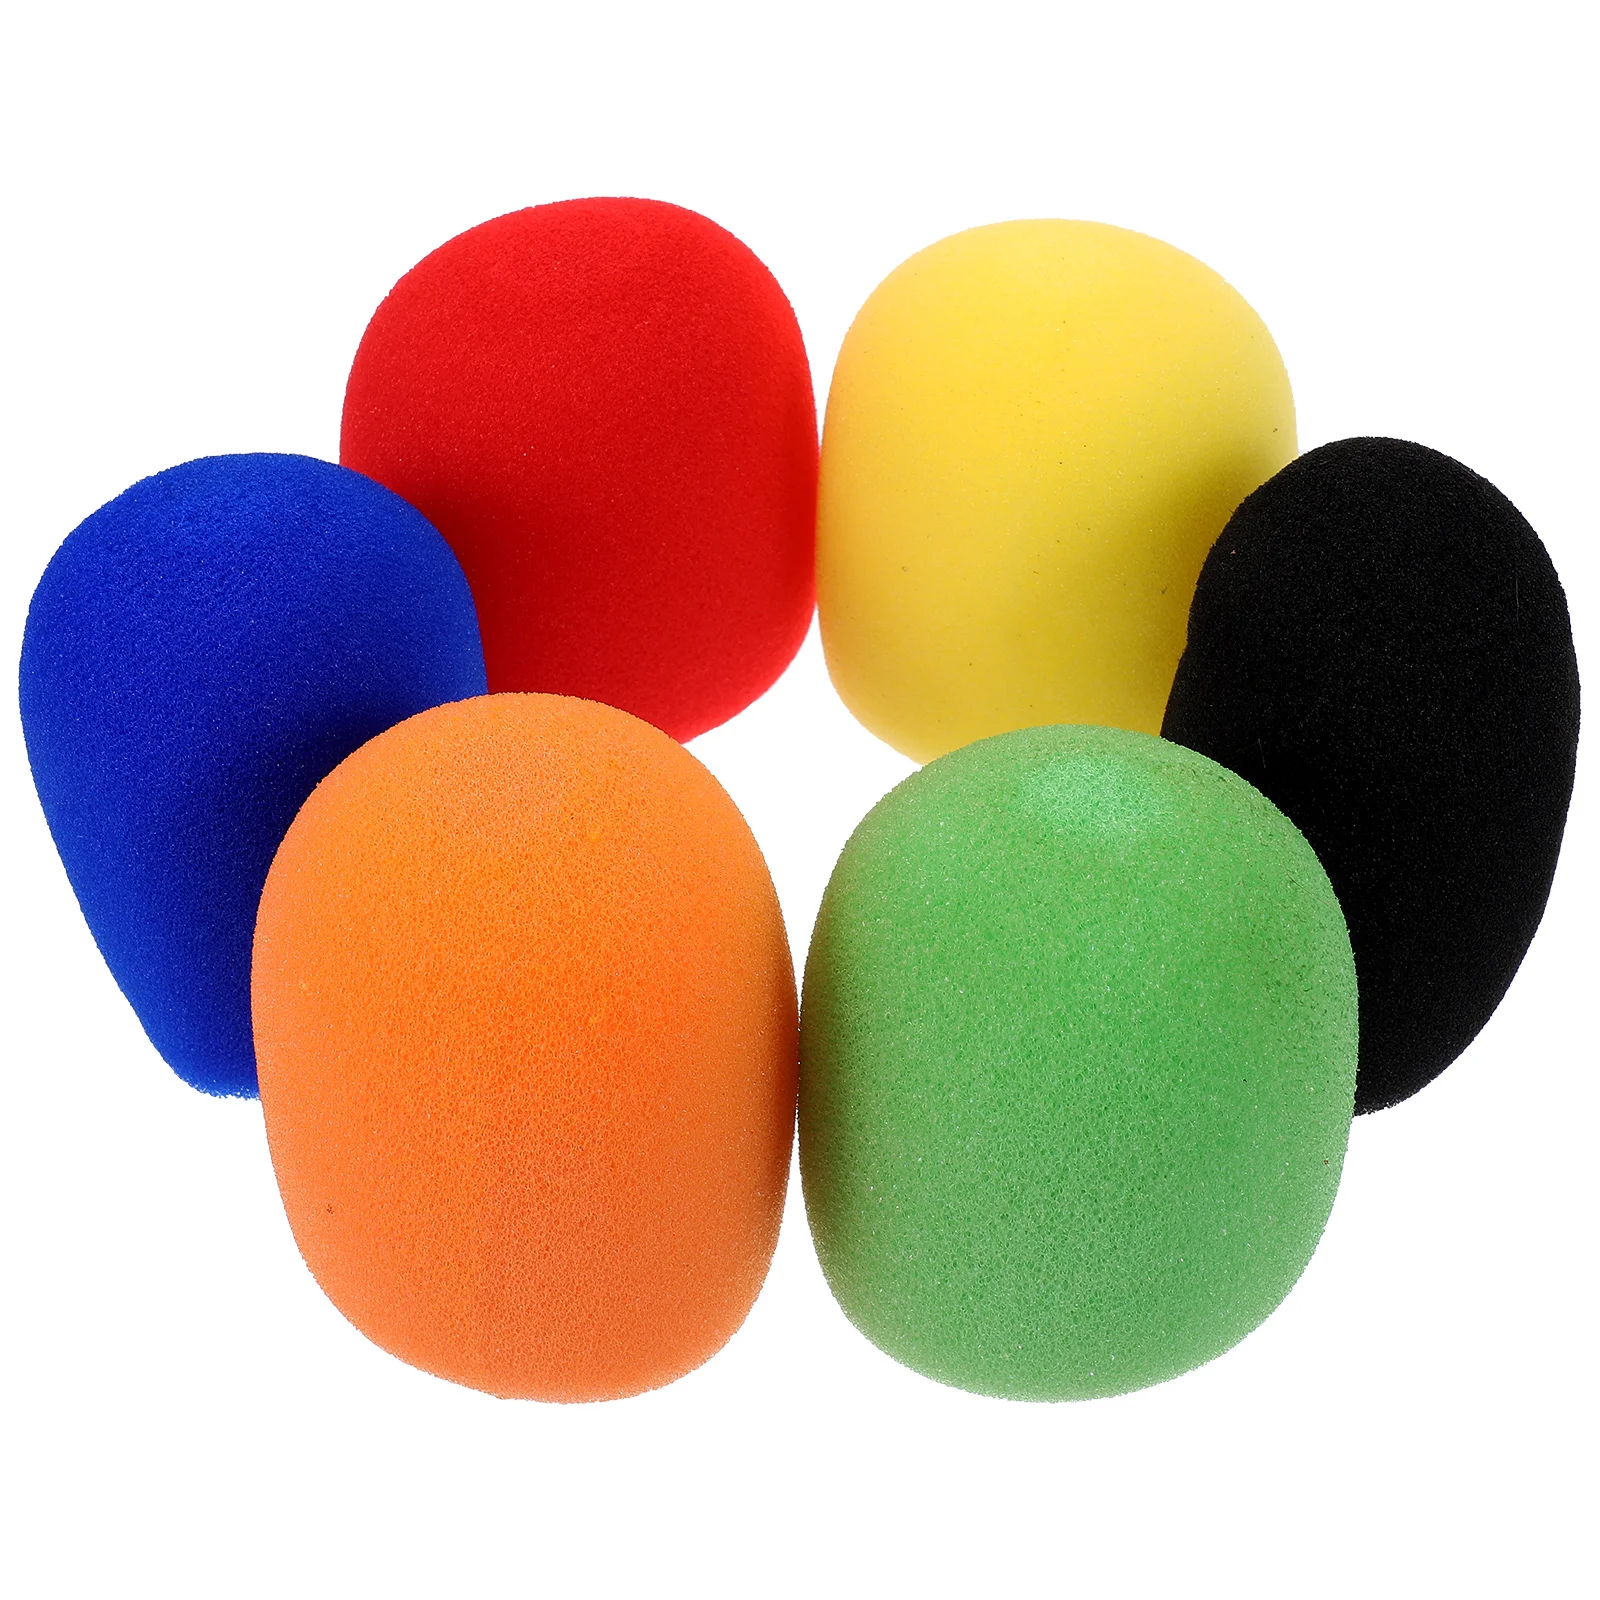 

Microphone Case Cover Stage Sponge Sponges Covers Windscreen Handheld Windscreens Disposable